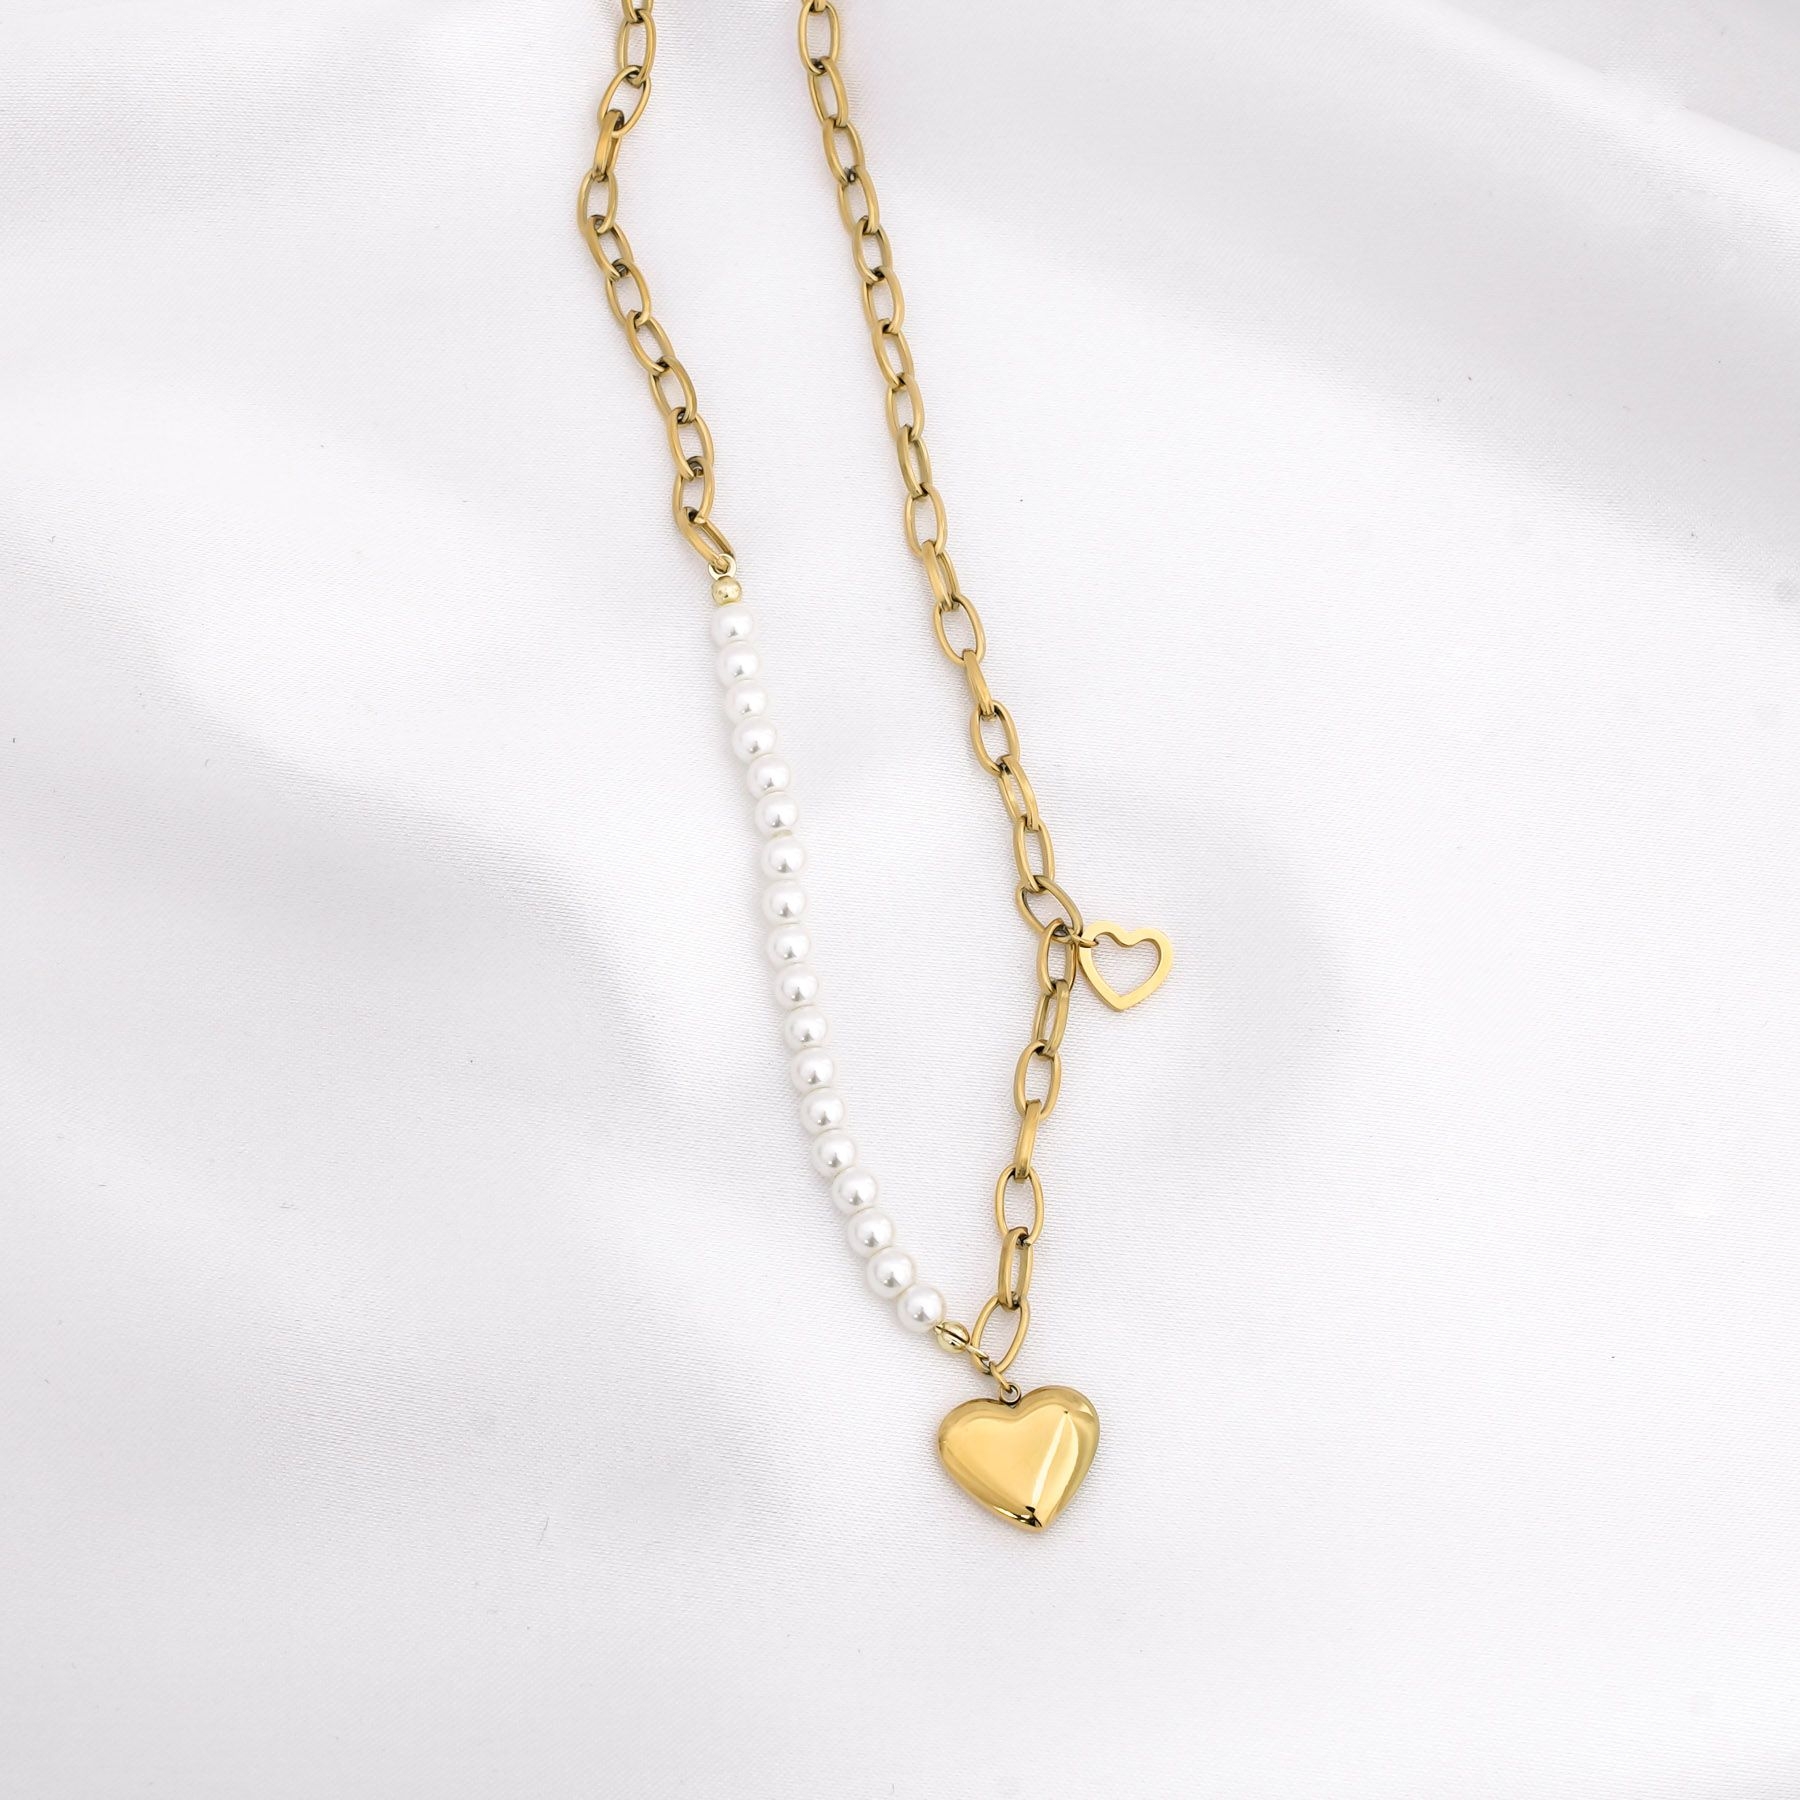 HEART AND SOUL NECKLACE - GOLD ' - ' ΜΕΝΤΑΓΙΟΝ